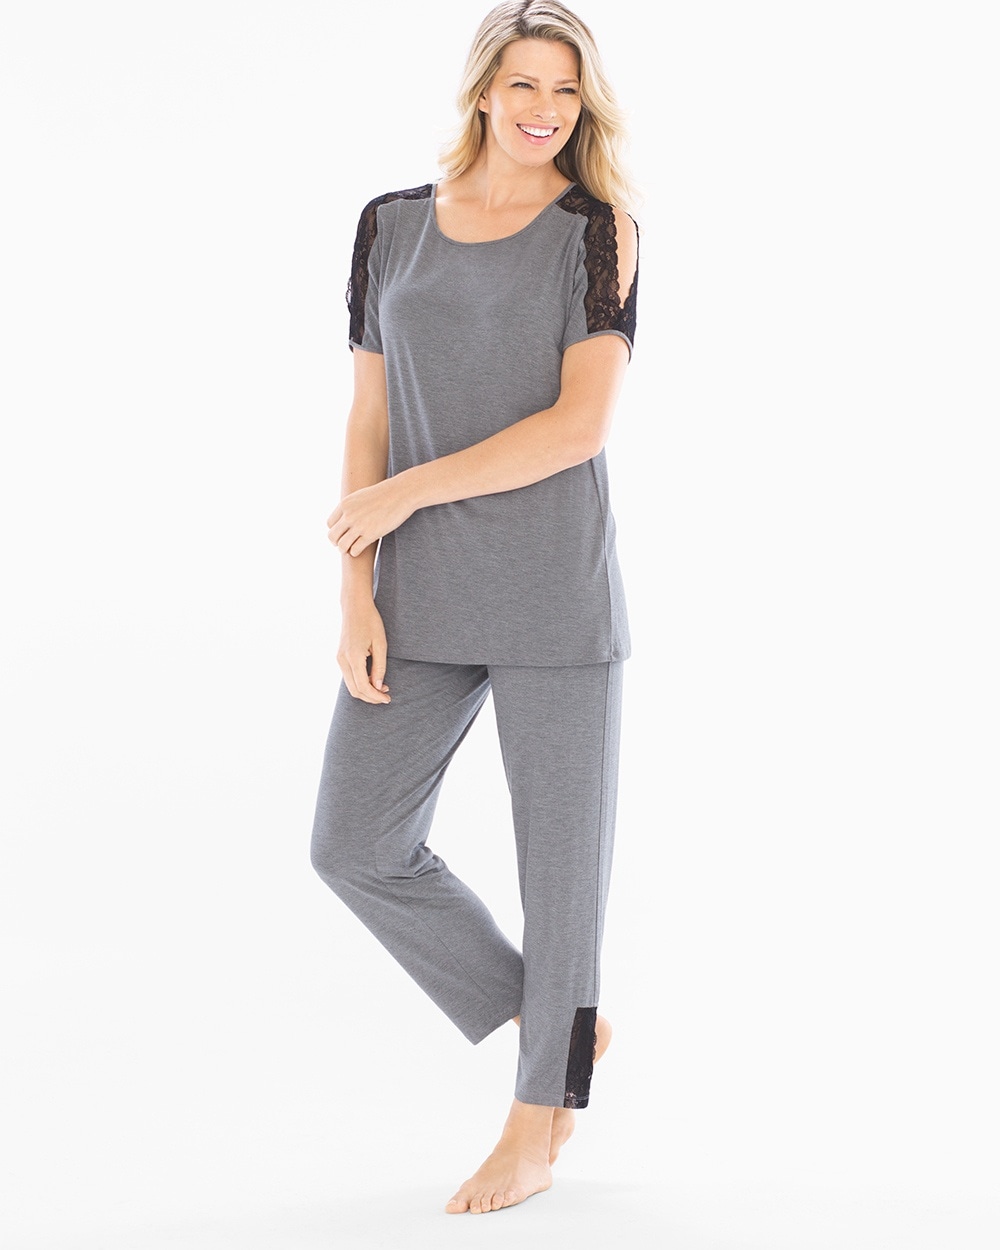 Cool Nights Lace Trim Short Sleeve Tee and Ankle Pants Pajama Set Heather Graphite